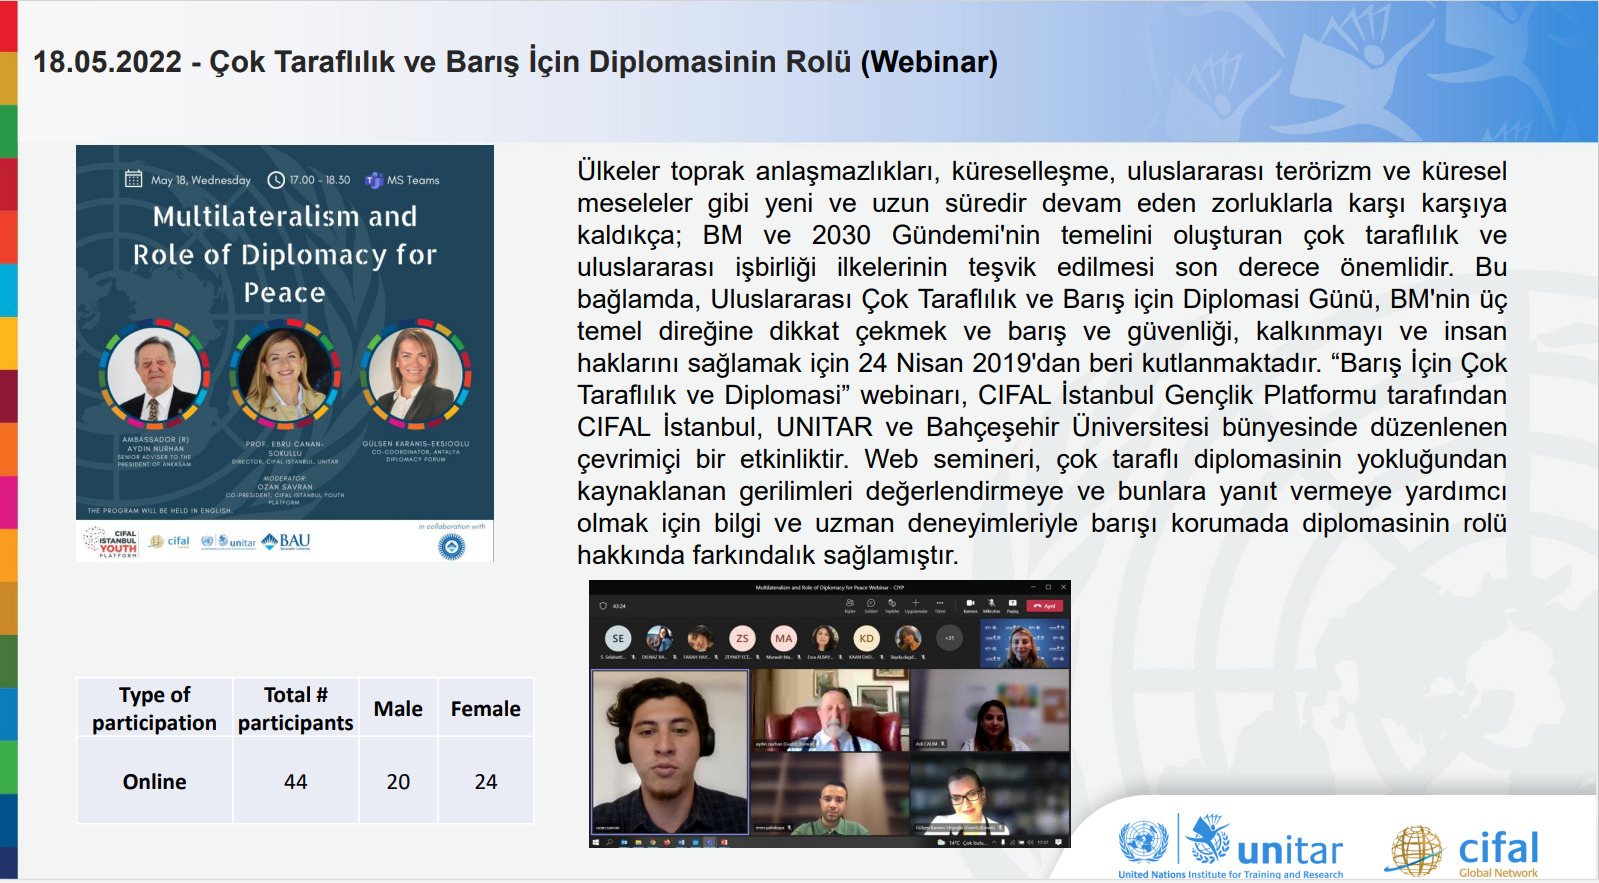 Multilateralism and the Role of Diplomacy for Peace Event